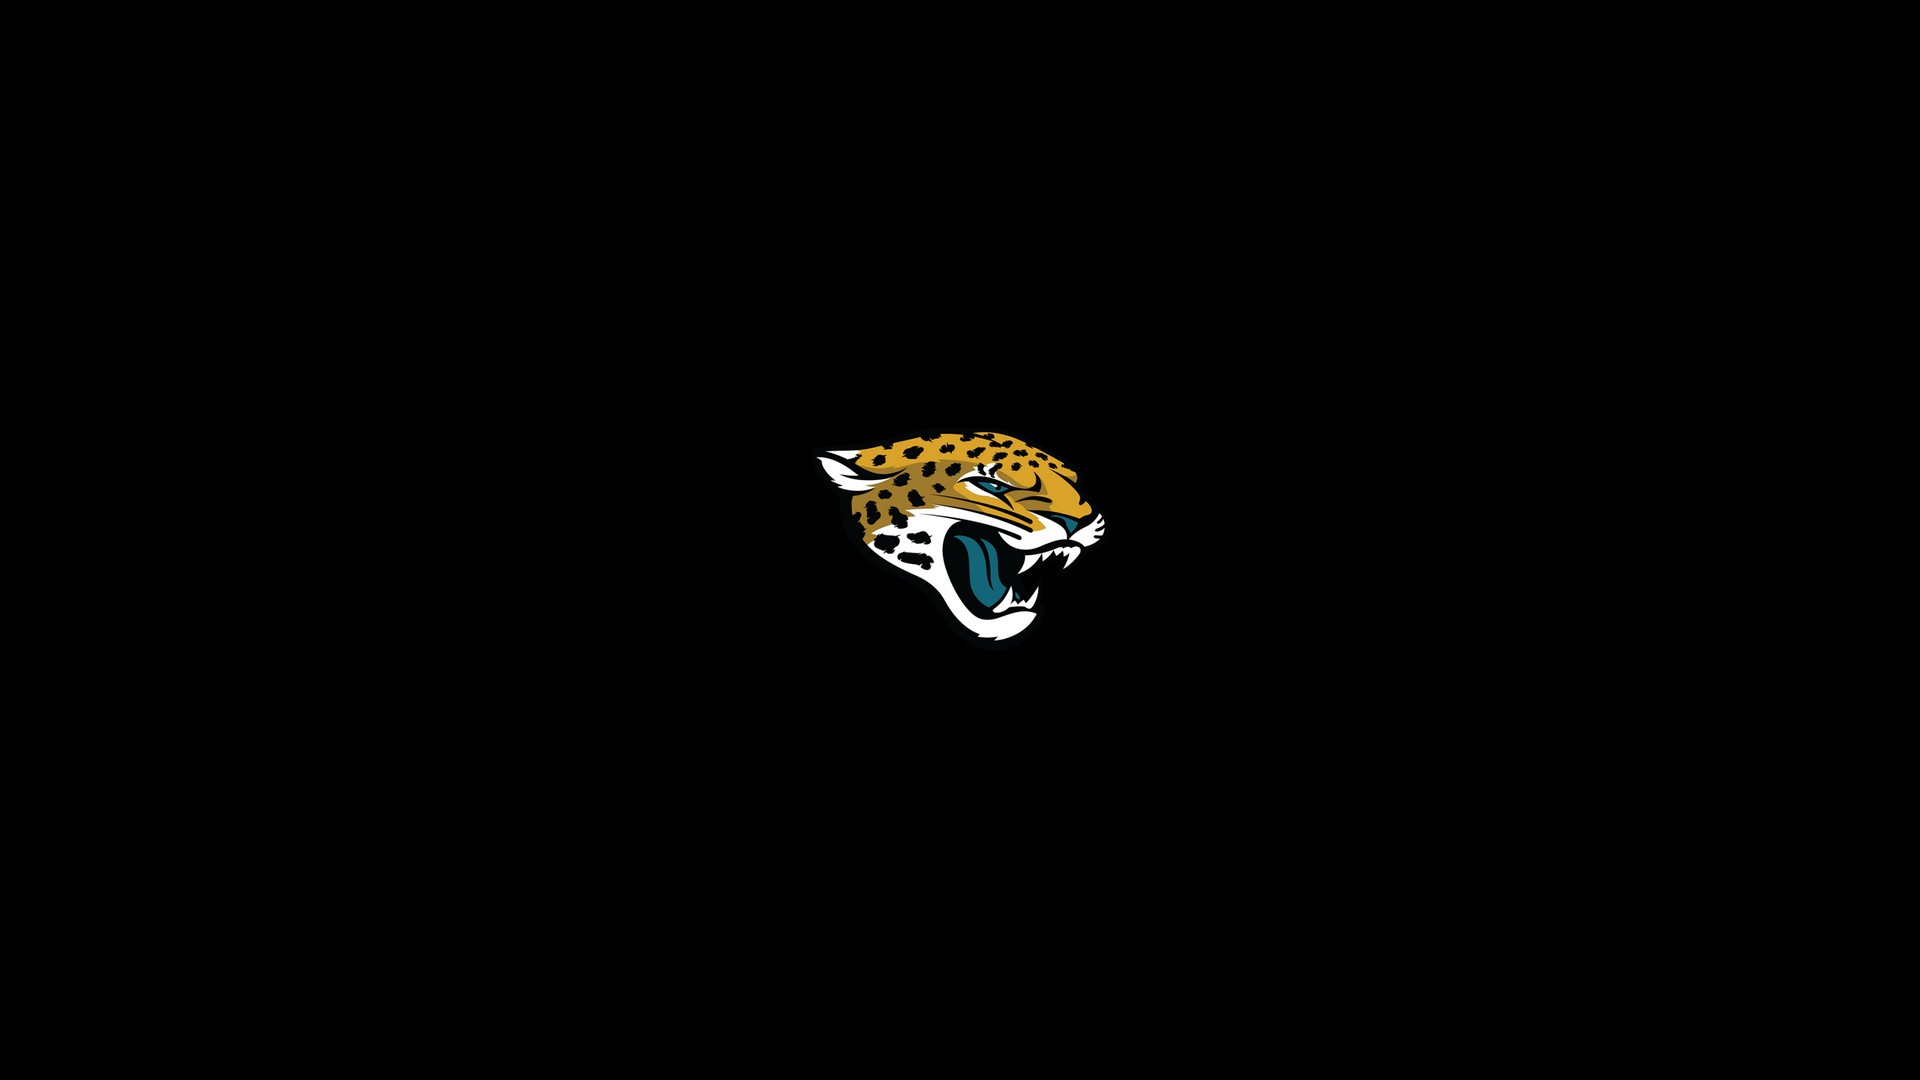 Backgrounds Jacksonville Jaguars HD With Resolution 1920X1080 pixel. You can make this wallpaper for your Mac or Windows Desktop Background, iPhone, Android or Tablet and another Smartphone device for free